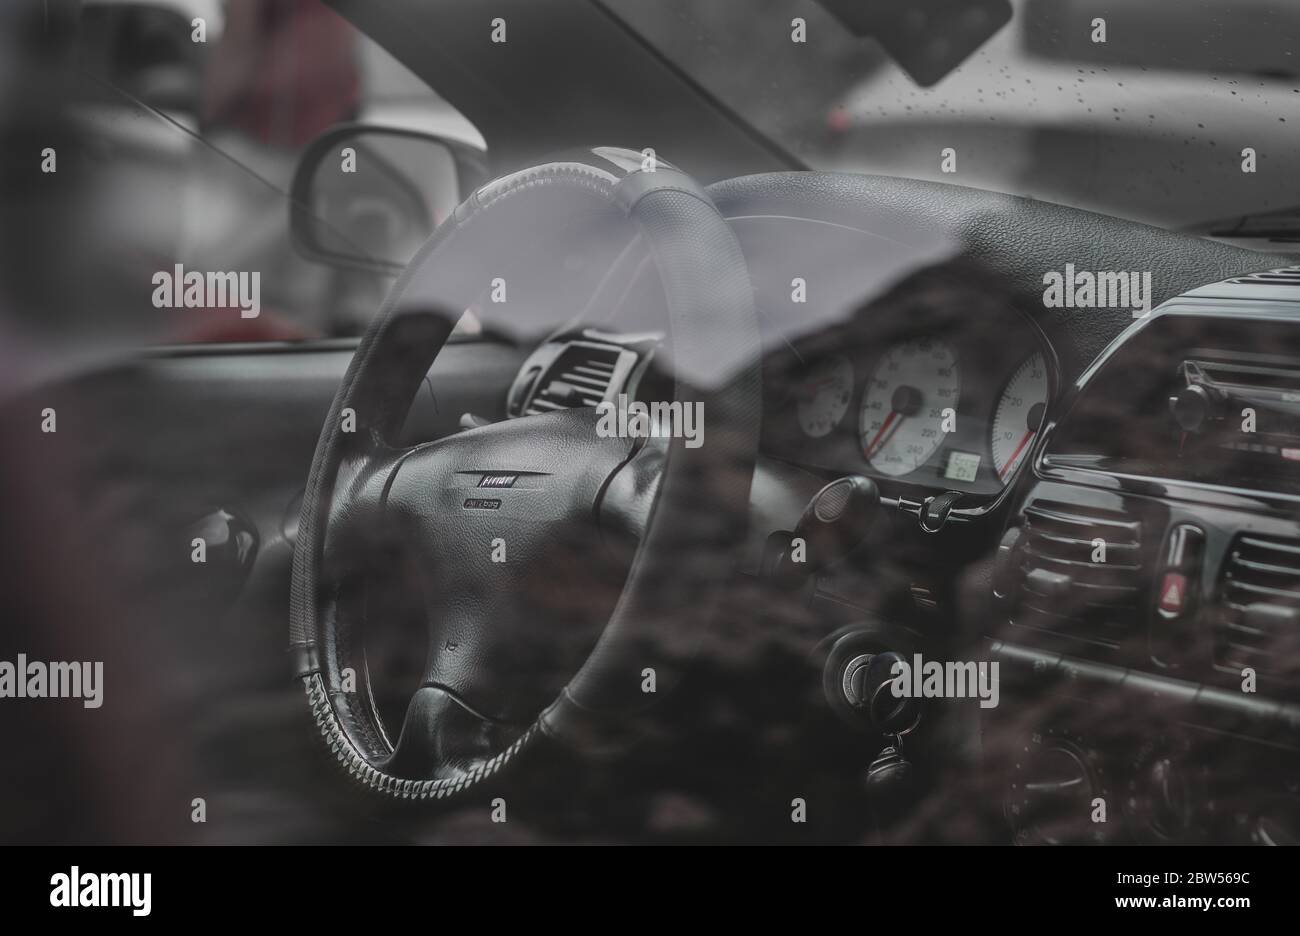 Black and white clean interior seen through glass of an older version of Fiat Bravo. White dashboard, wrapped steering wheel Stock Photo